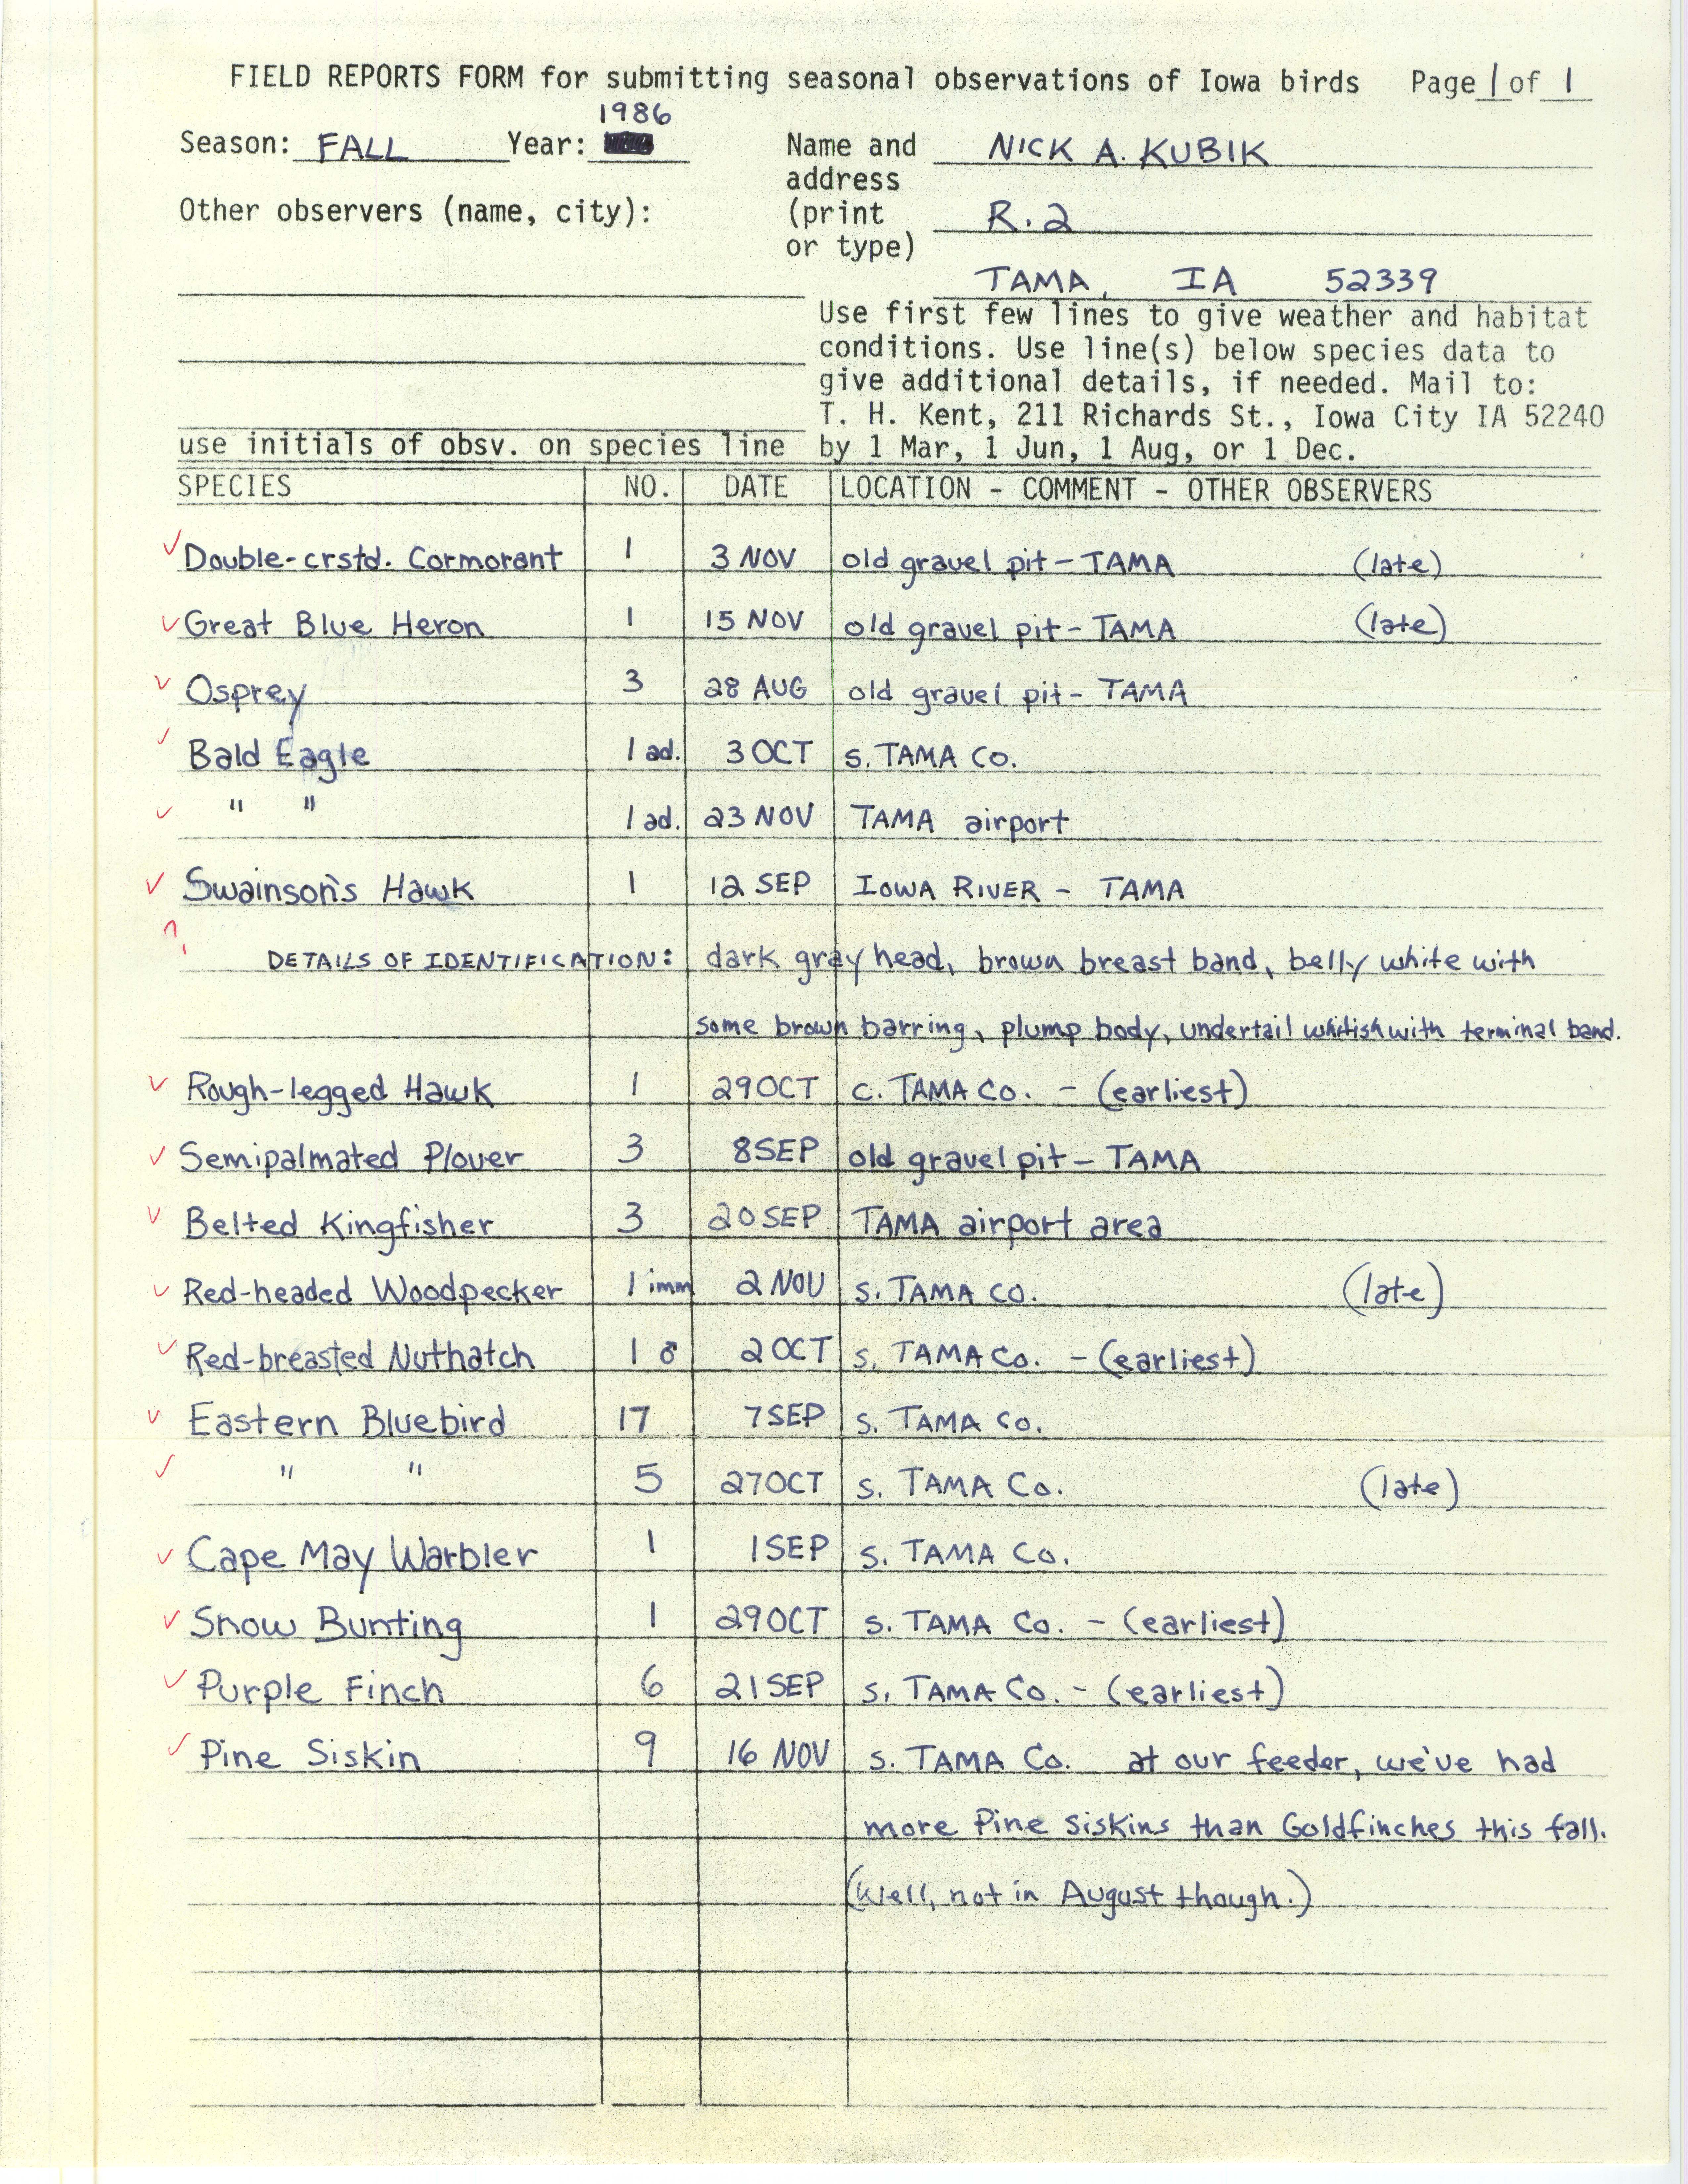 Field reports form for submitting seasonal observations of Iowa birds, Nicholas A. Kubik, fall 1986